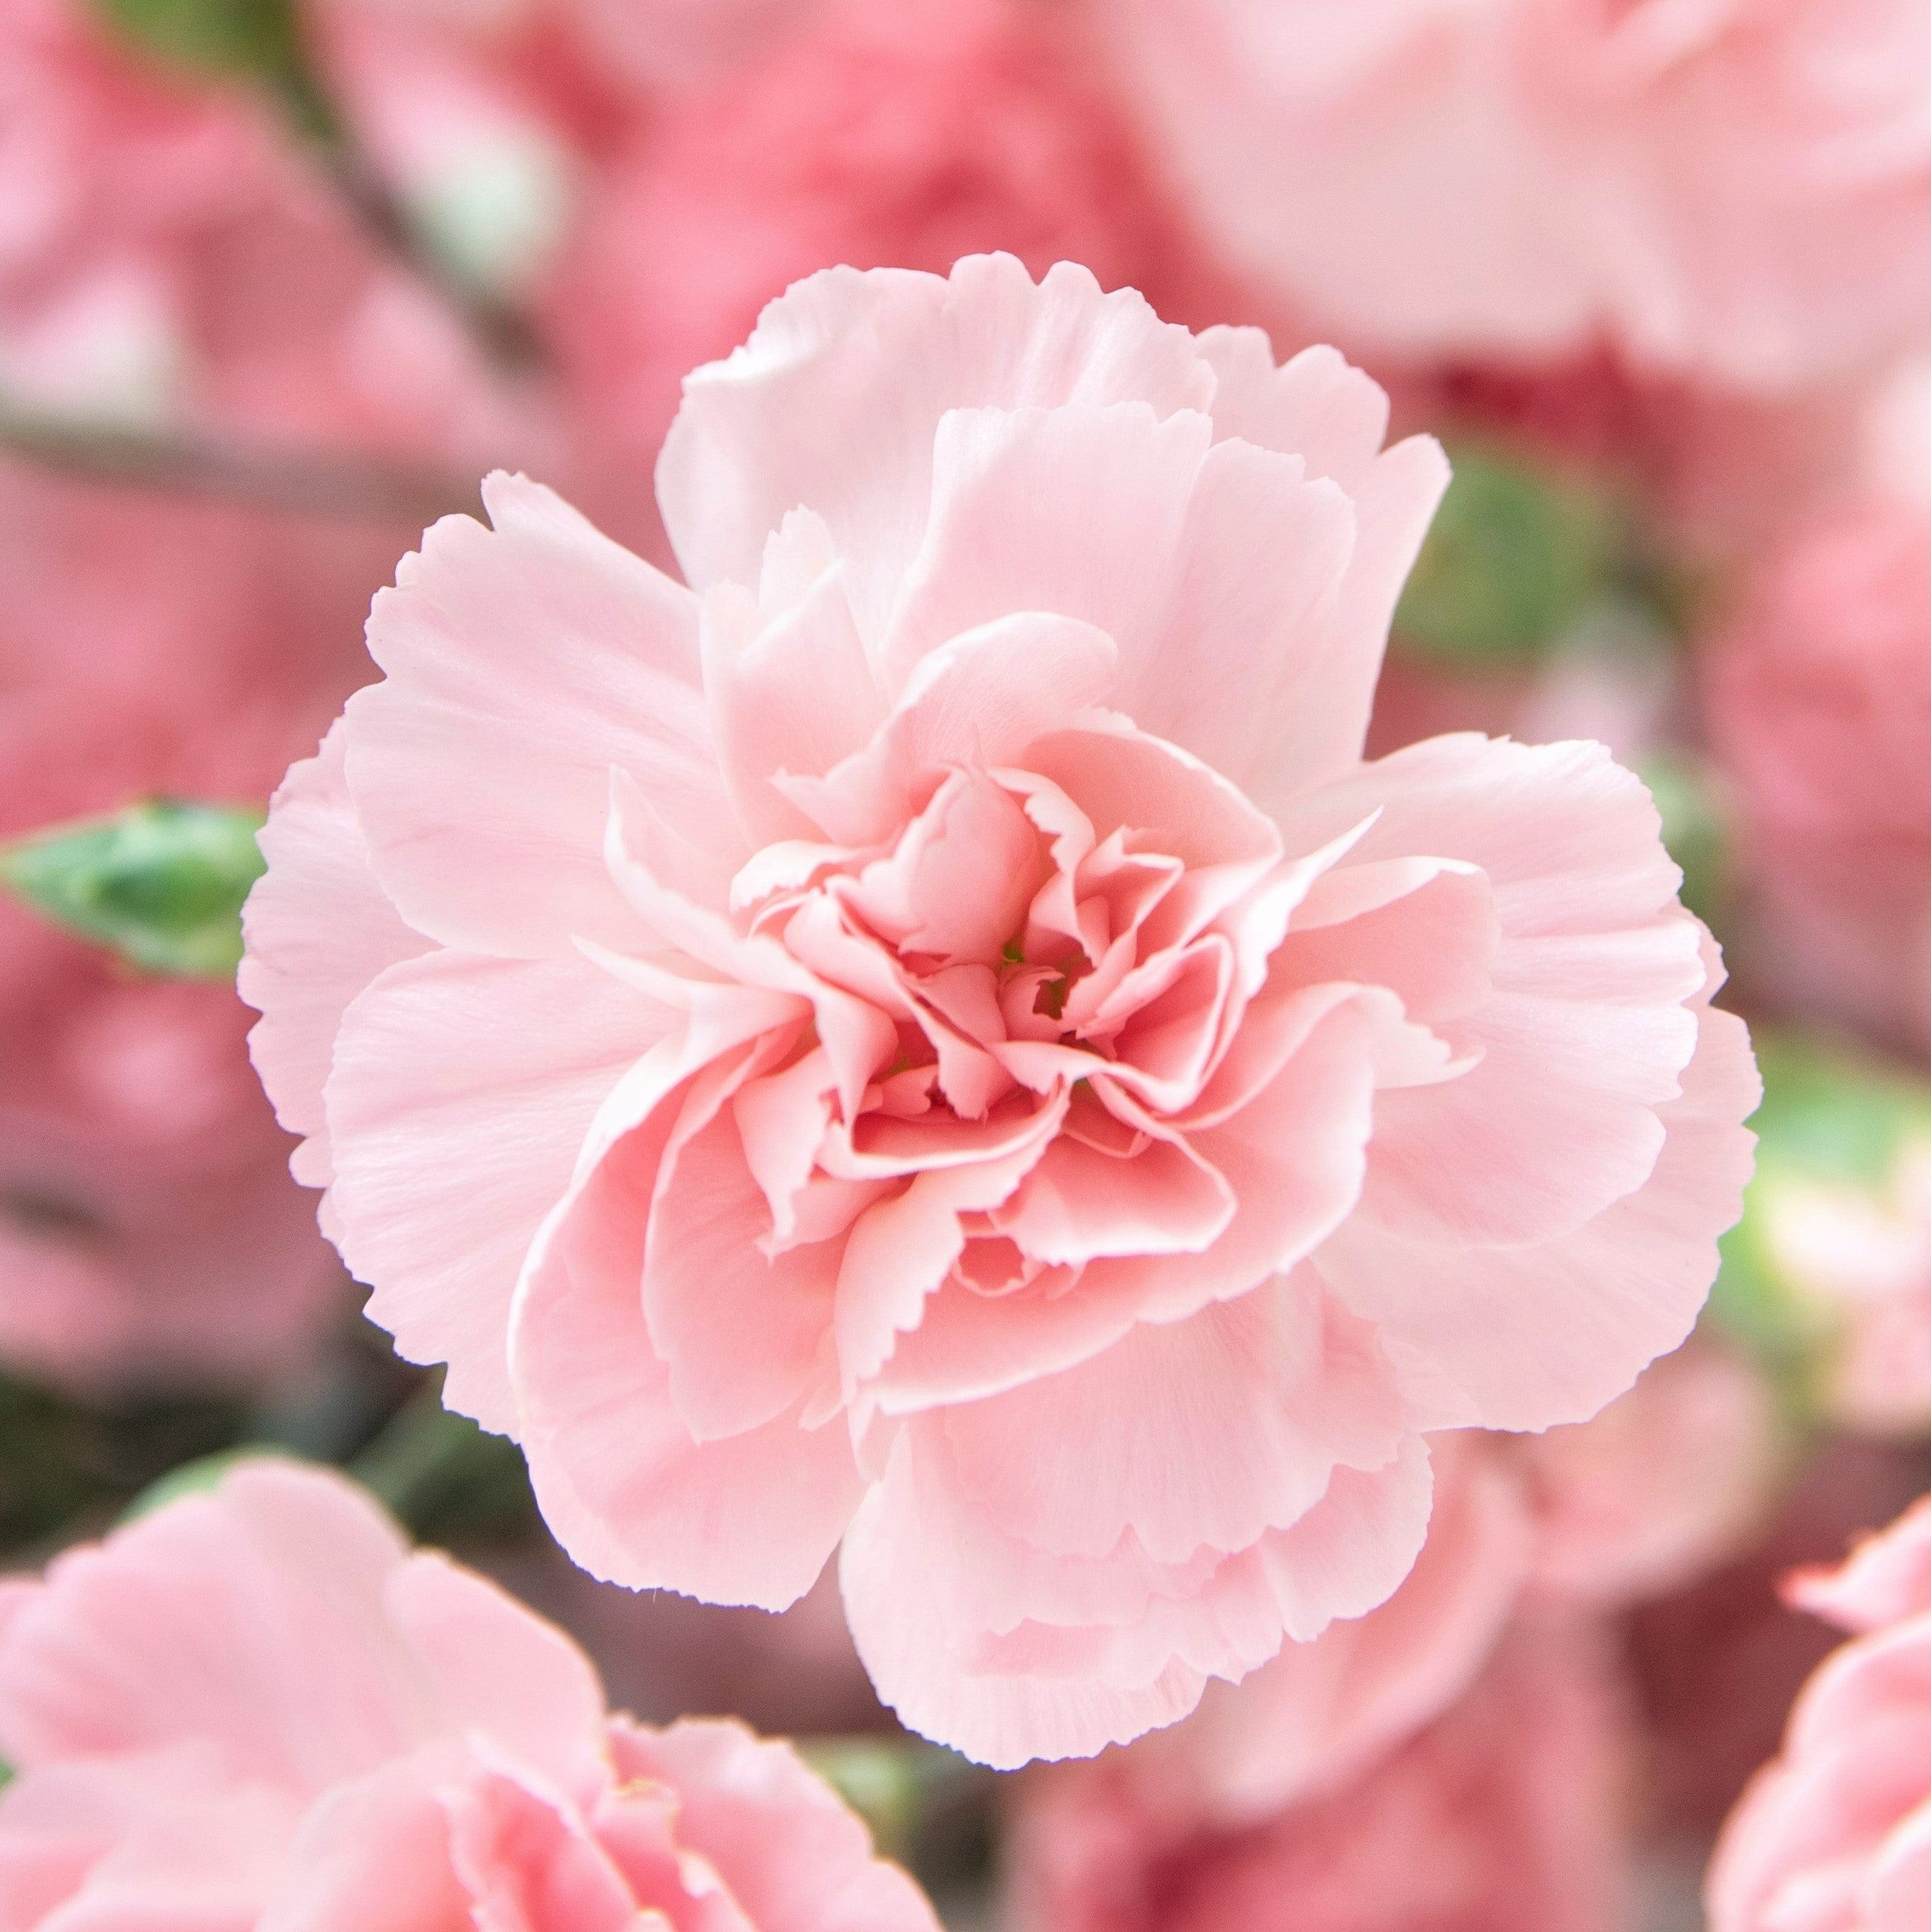 Bi-color Carnation And Aroma Pot For Beauty Image Stock Photo